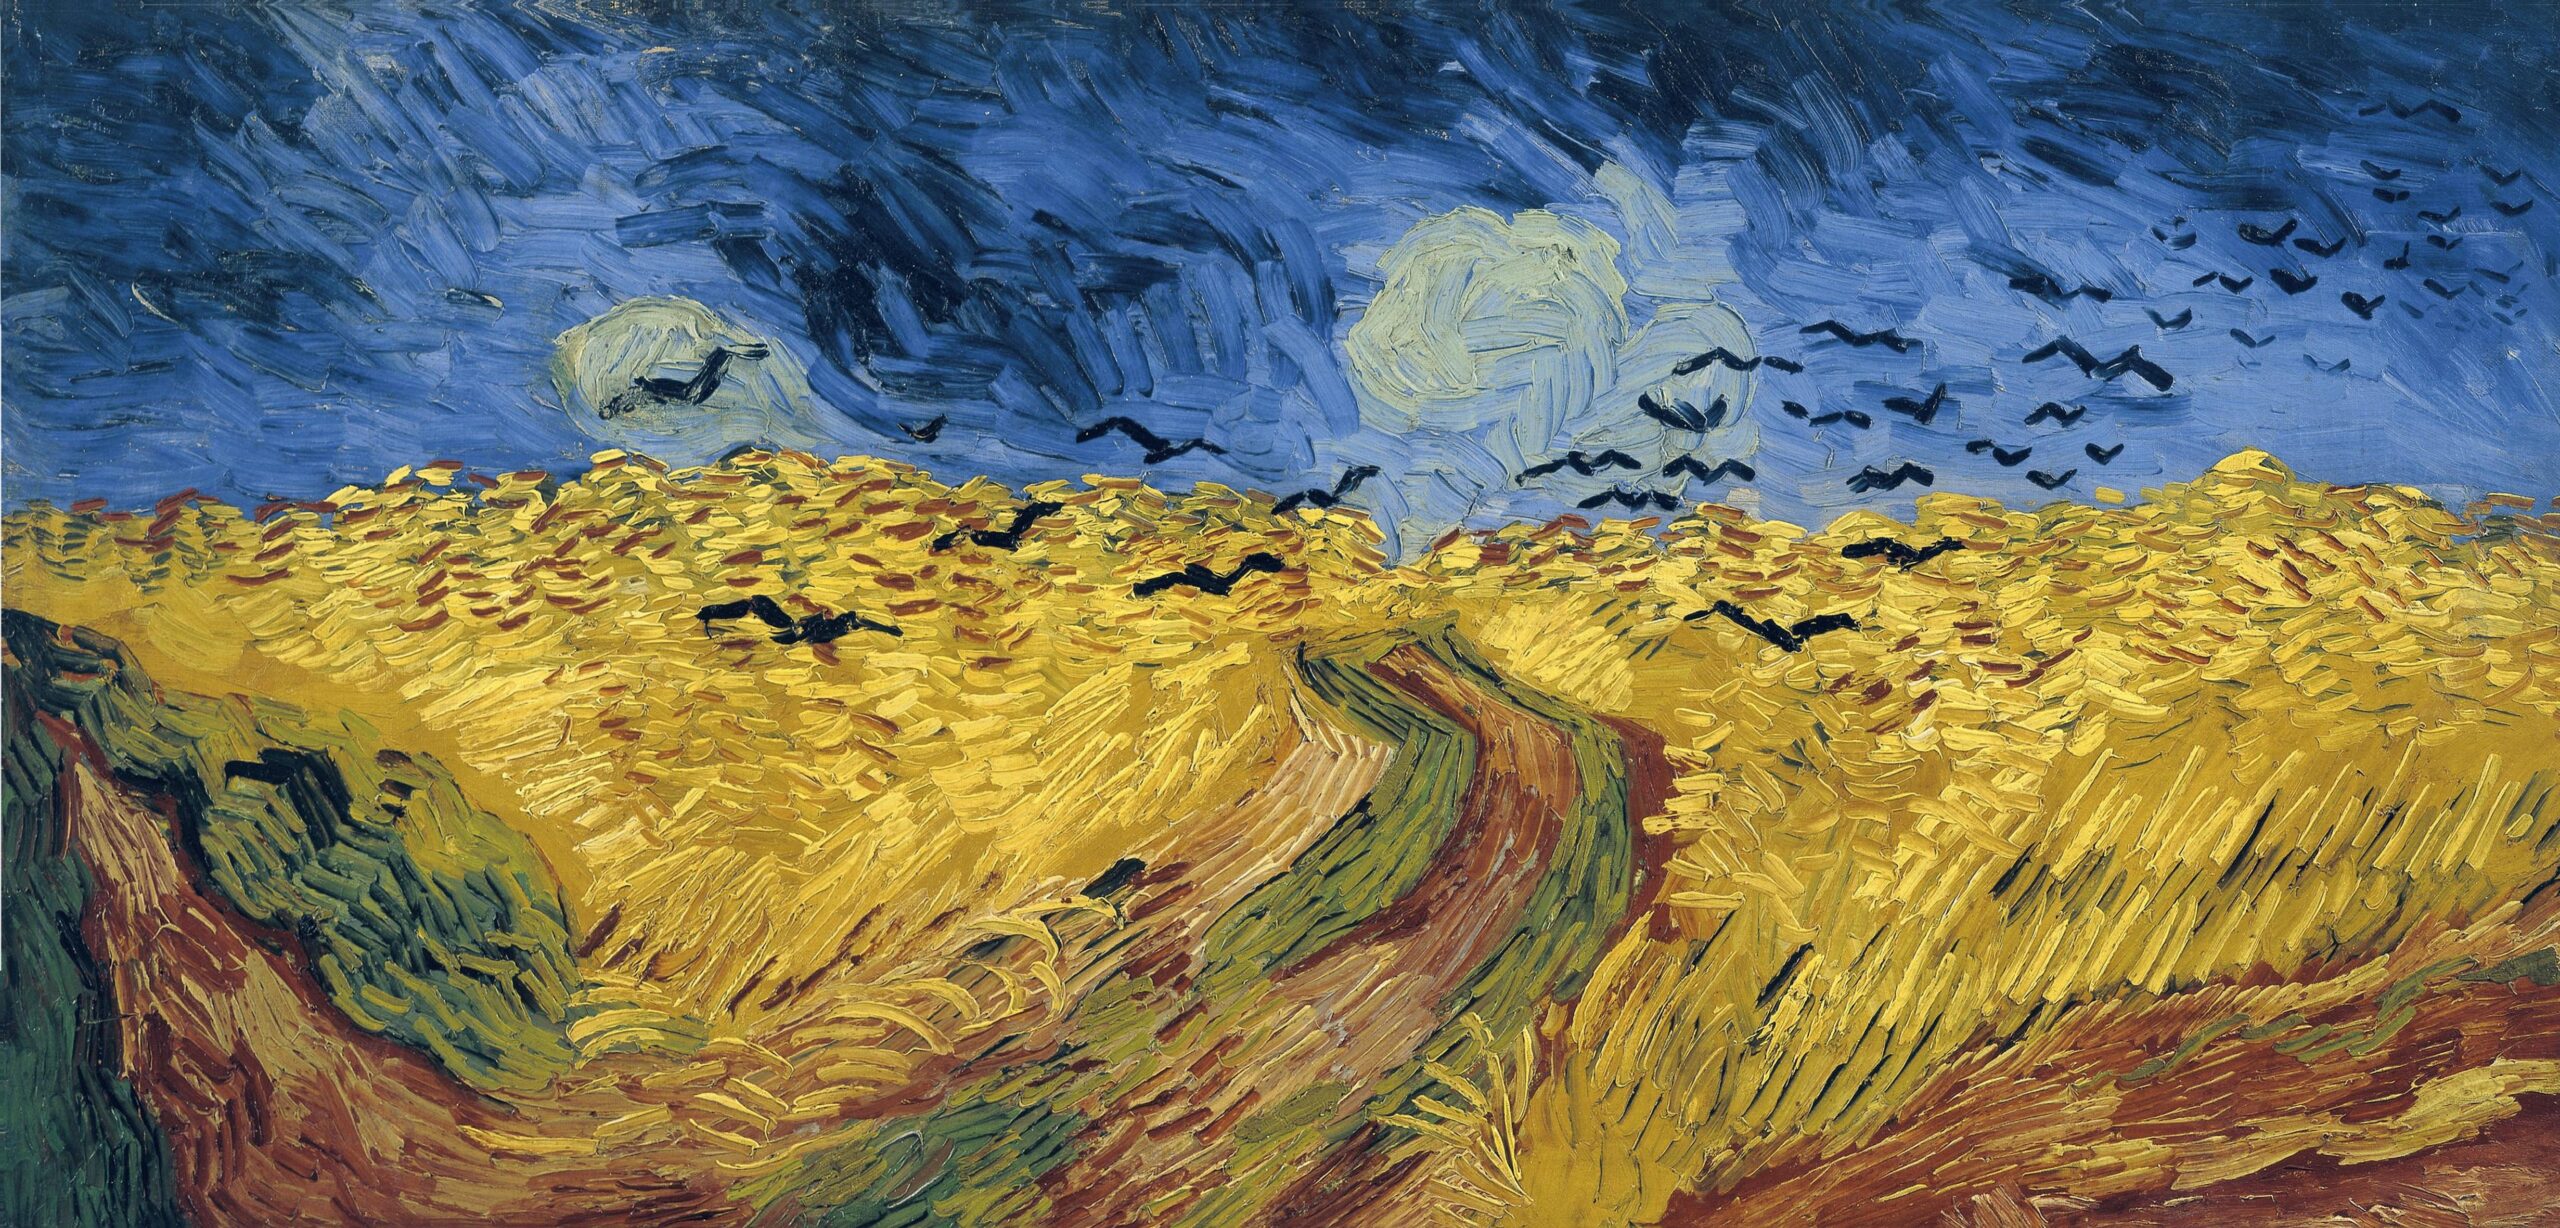 Vincent Van Gogh's painting: Wheatfield with Crows, 1890